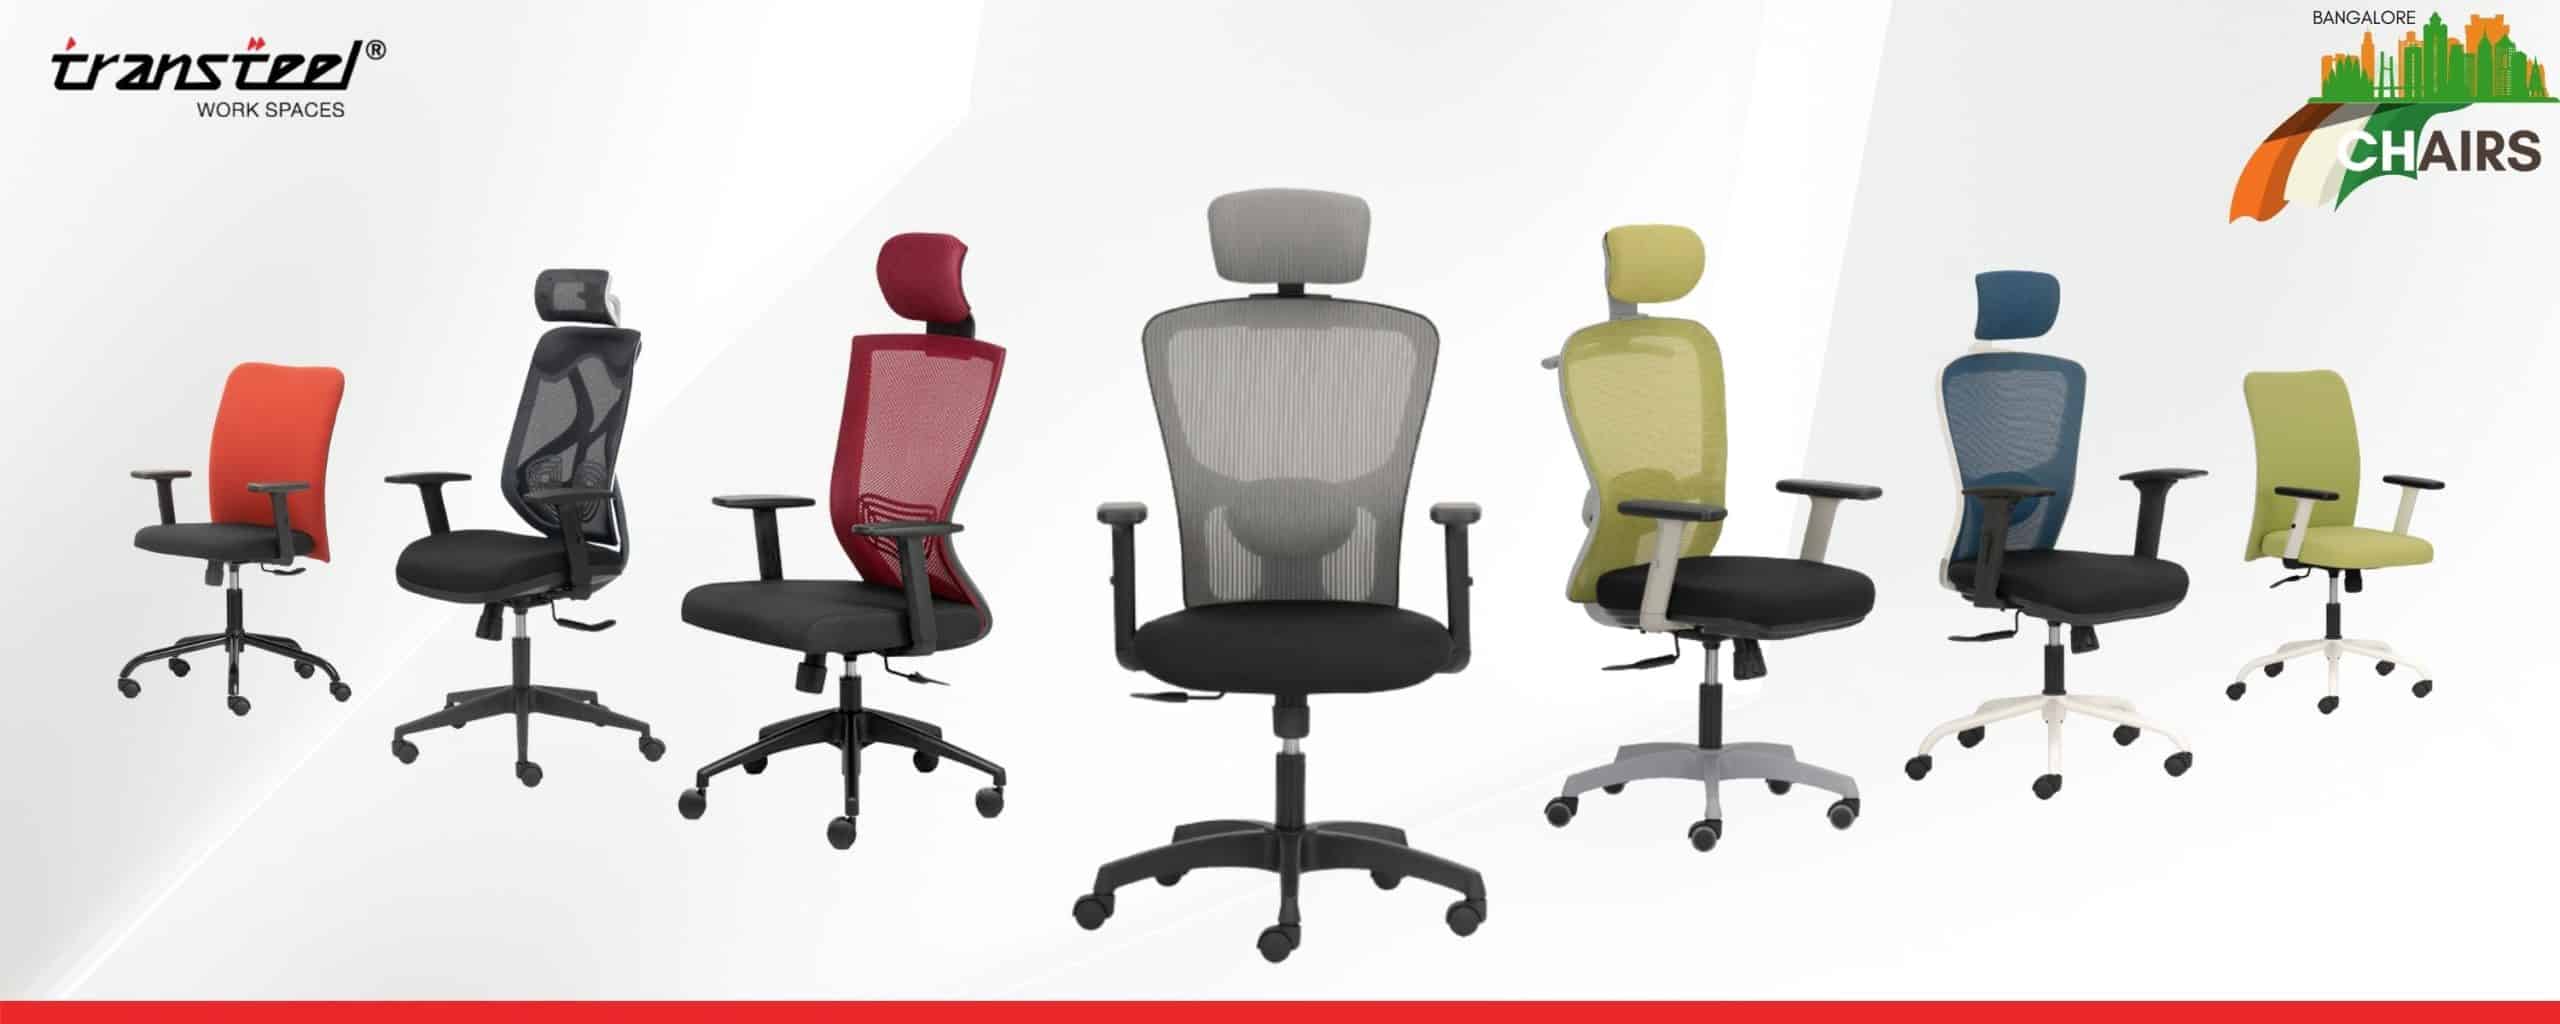 Office chairs in Bangalore - Transteel, India